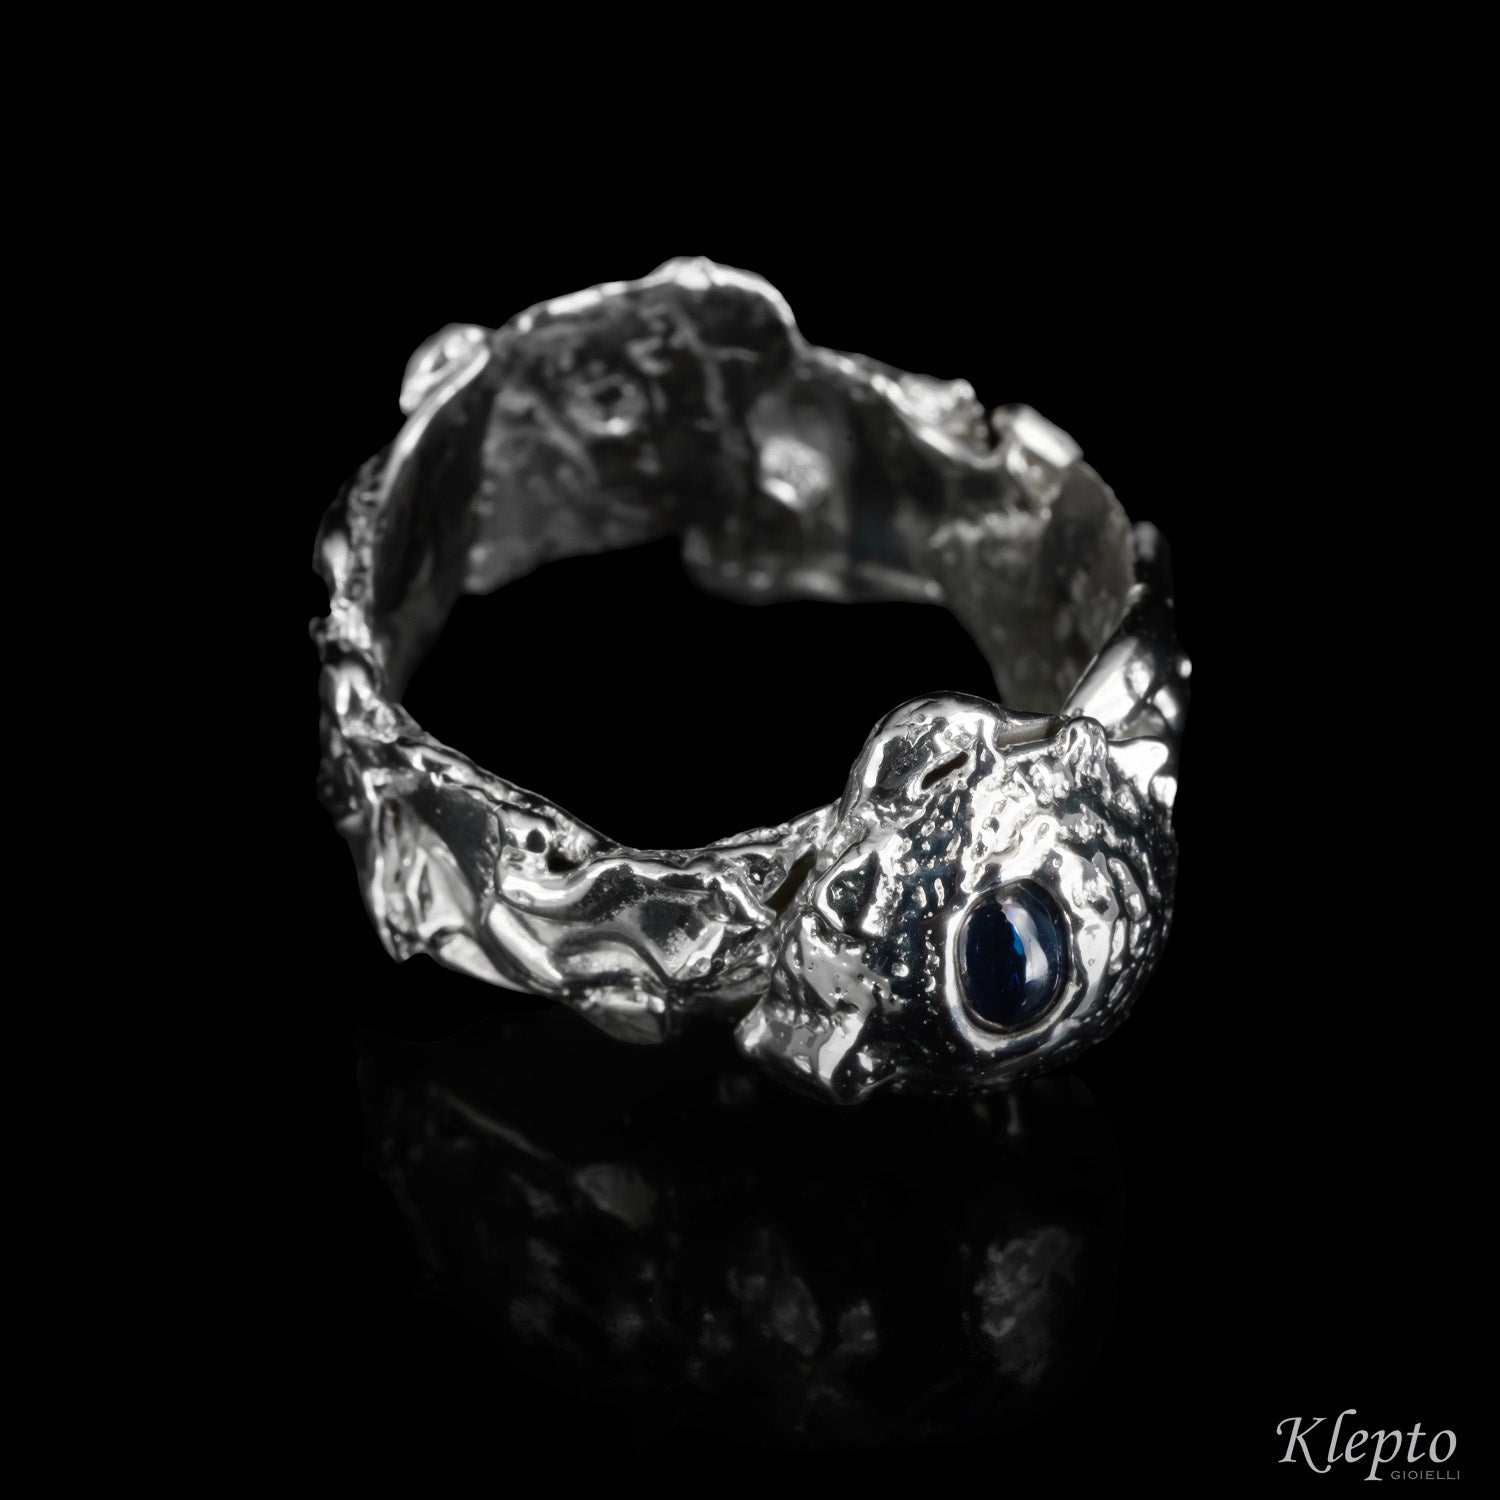 Silnova Silver Ring with Blue Sapphire